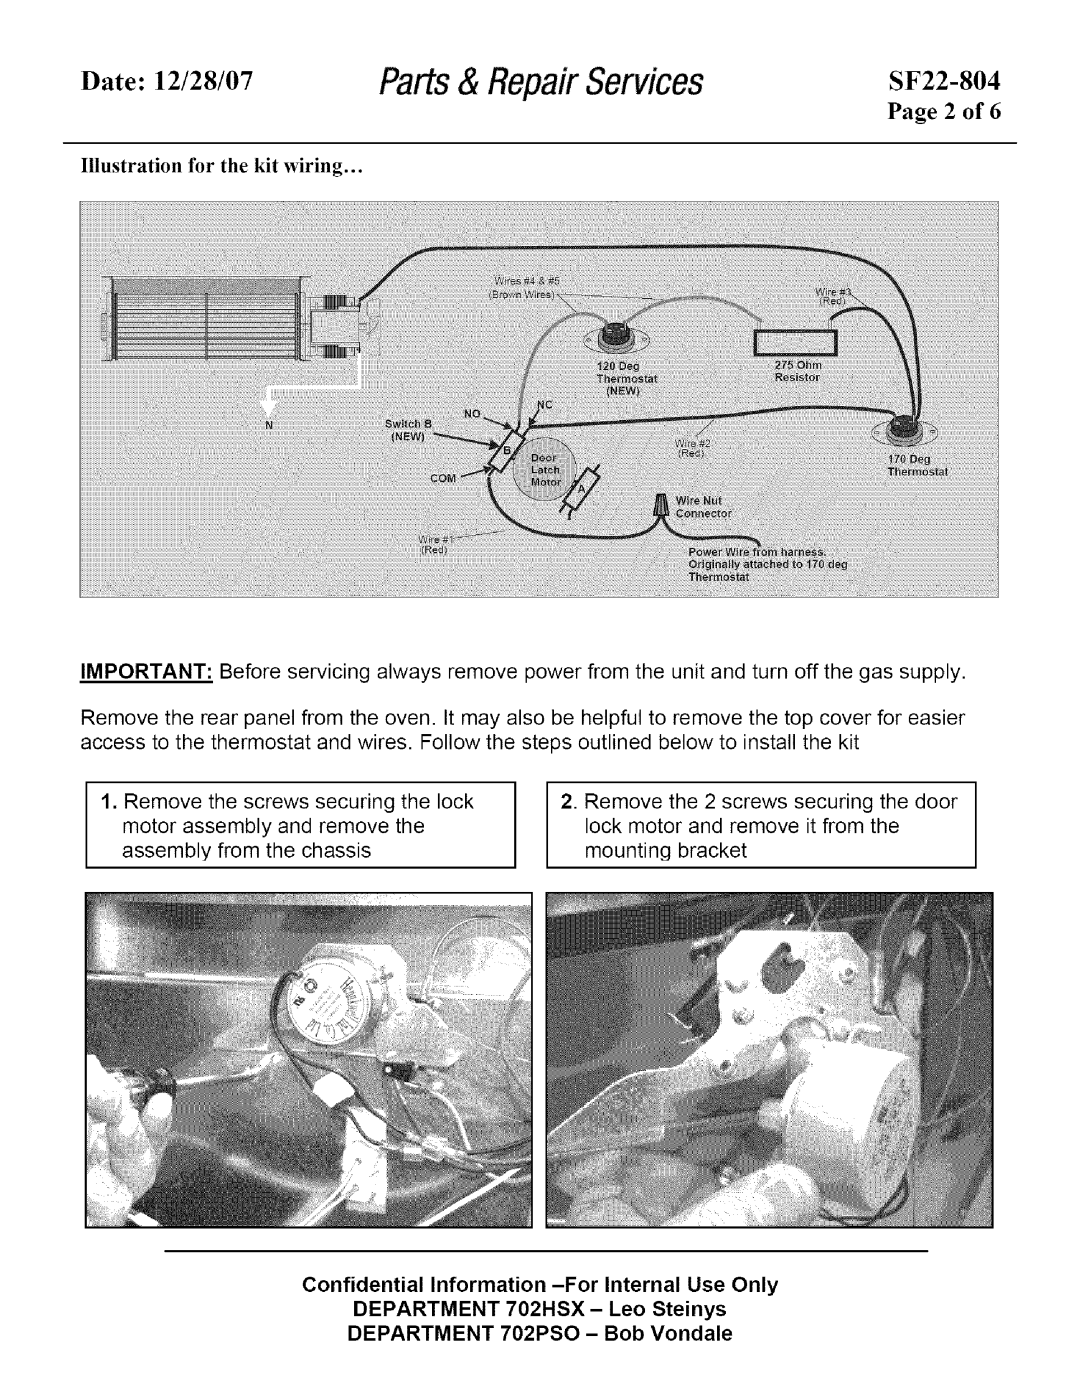 Kenmore SF22-804 instruction sheet Parts& RepaLrServices, Illustration for the kit wiring, Page 2 of, Date 12/28/07 